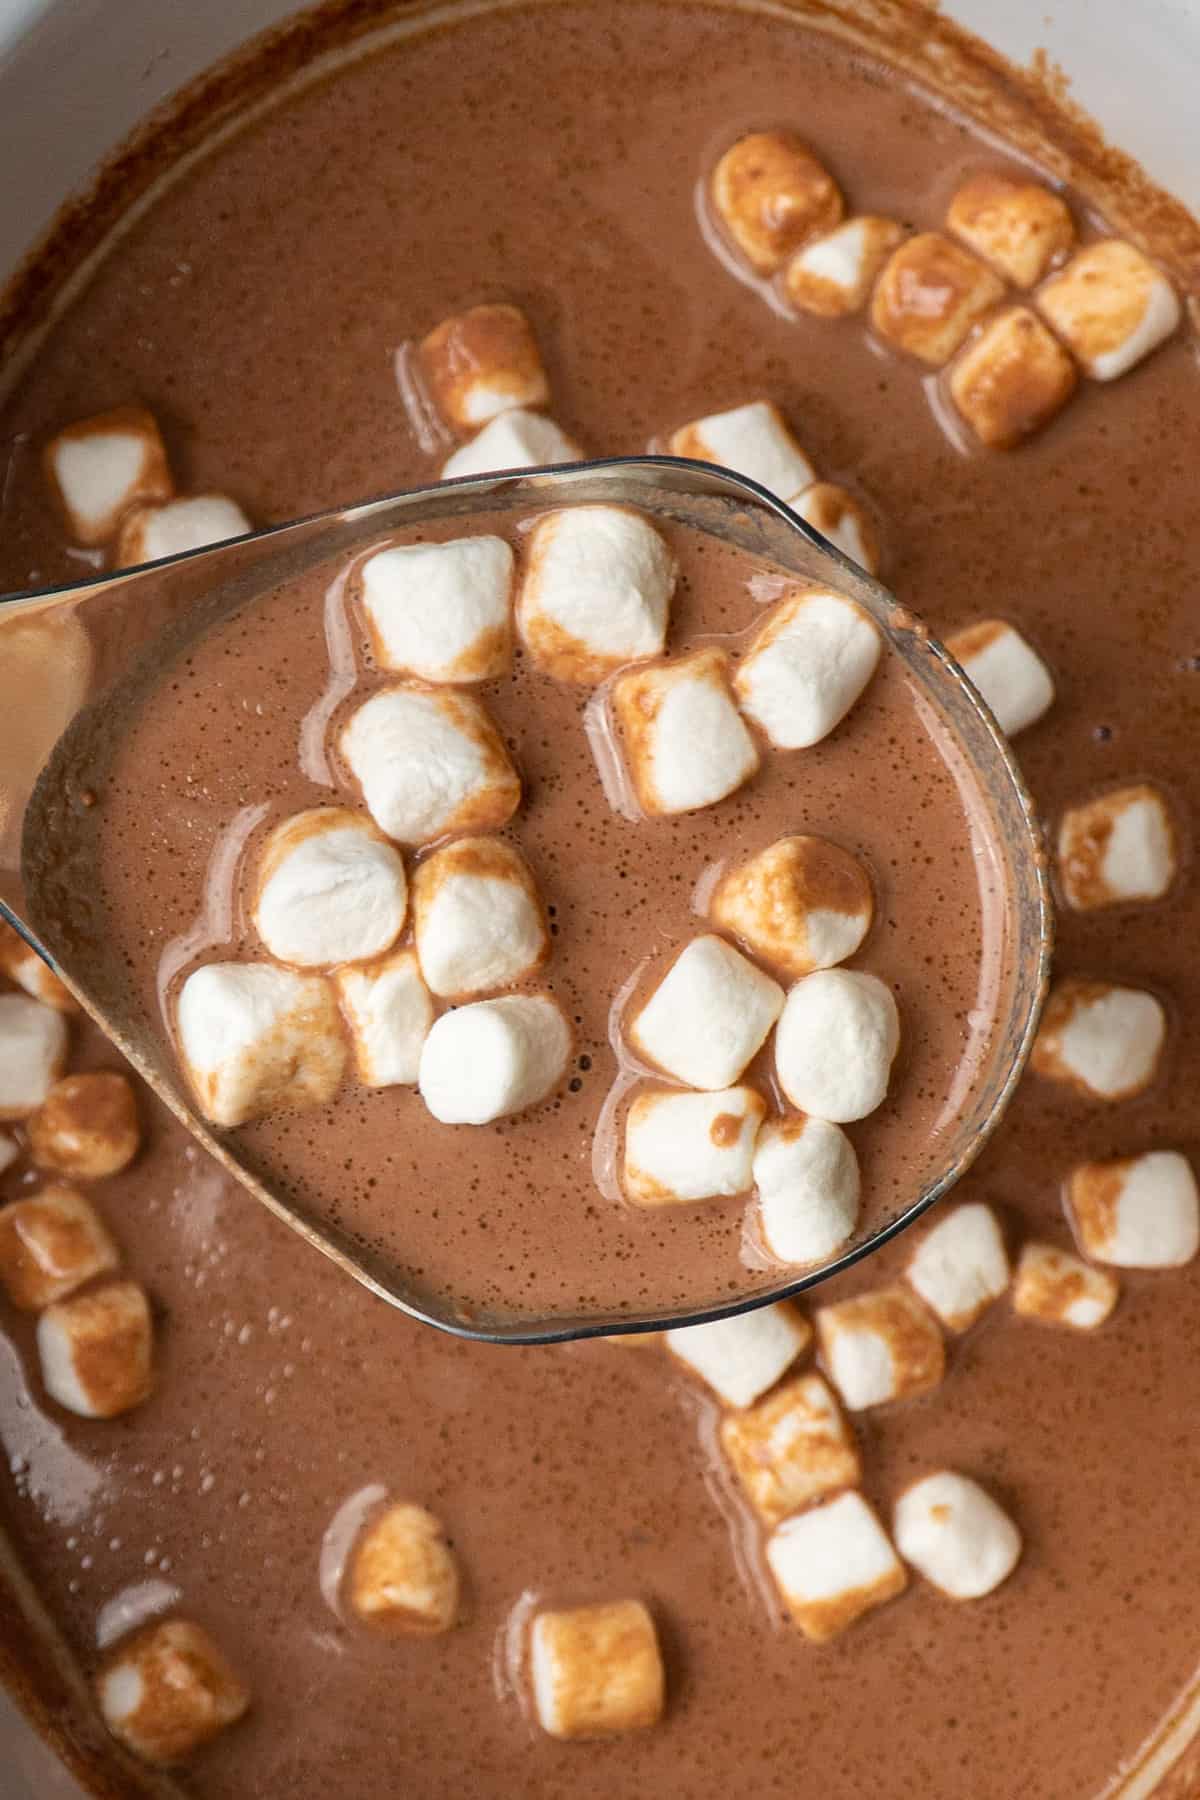 Hot chocolate in a ladle over a crock pot with marshmallows in it